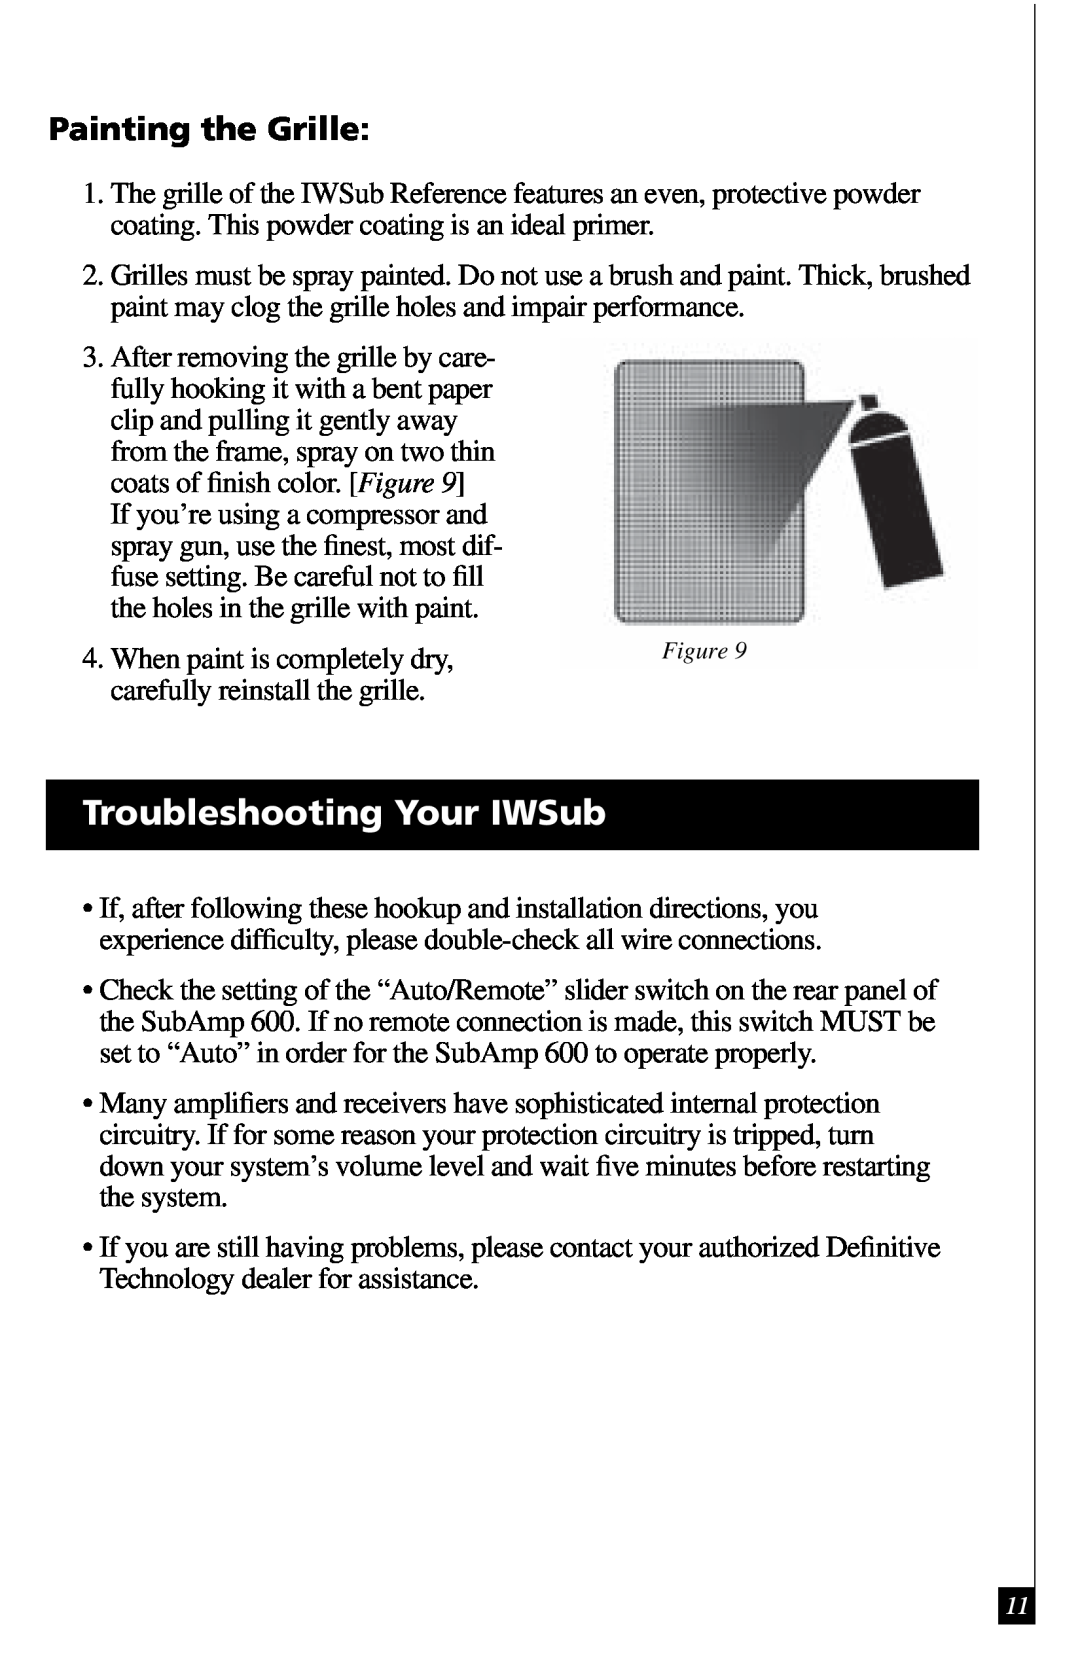 Definitive Technology 600 owner manual Troubleshooting Your IWSub, Painting the Grille 